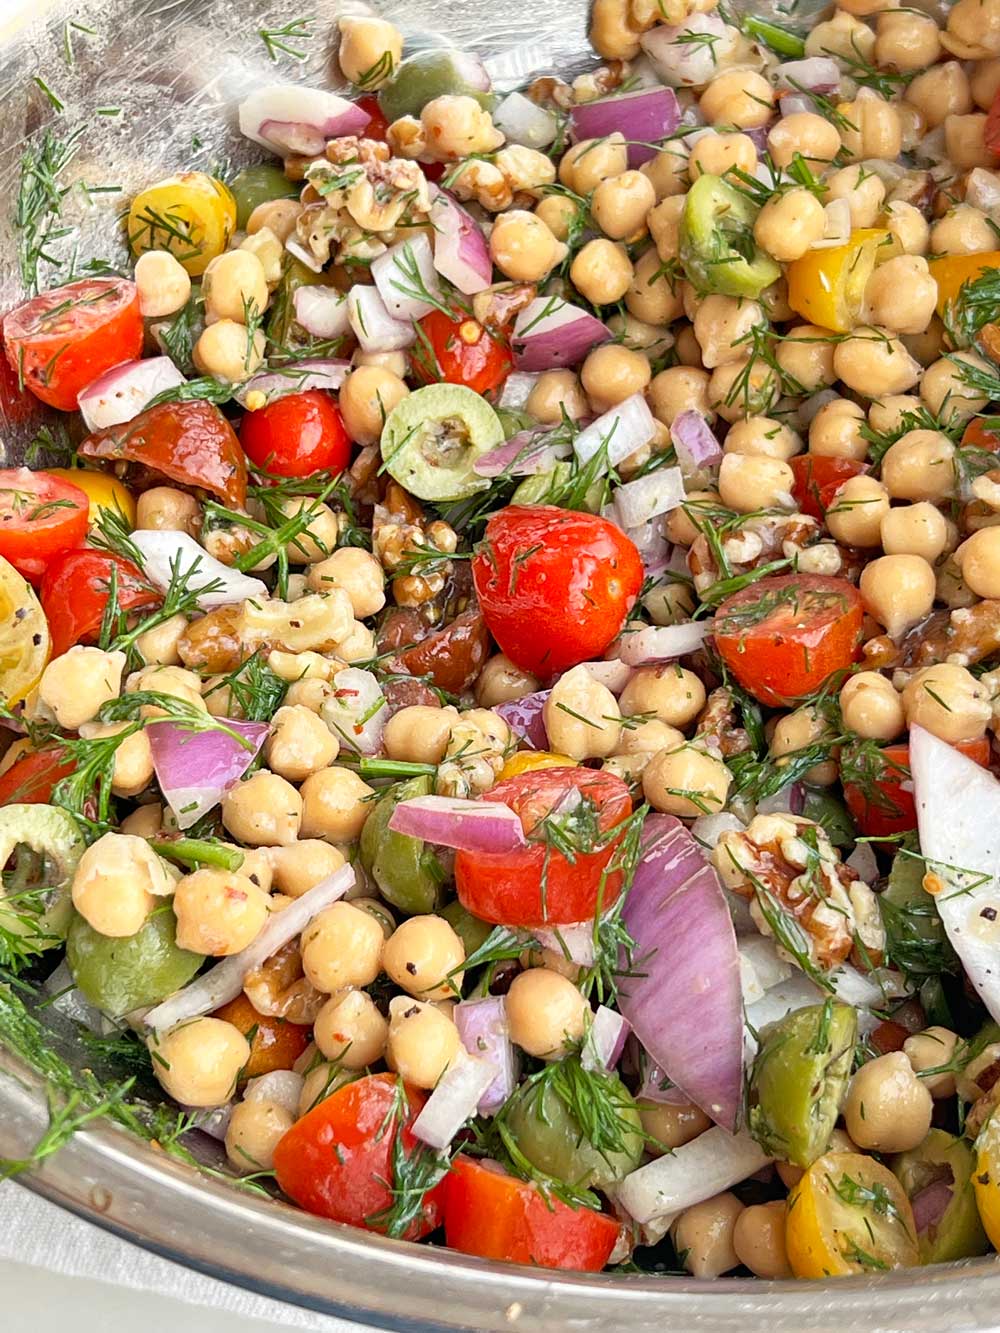 Chickpea Salad with Dijon Dressing. This is an easy meal prep that is easy and perfect dinner recipe, vegetarian recipe, or perfect side dish to chicken. Happy Cooking! www.ChopHappy.com #chcikpeasalad #saladrecipe